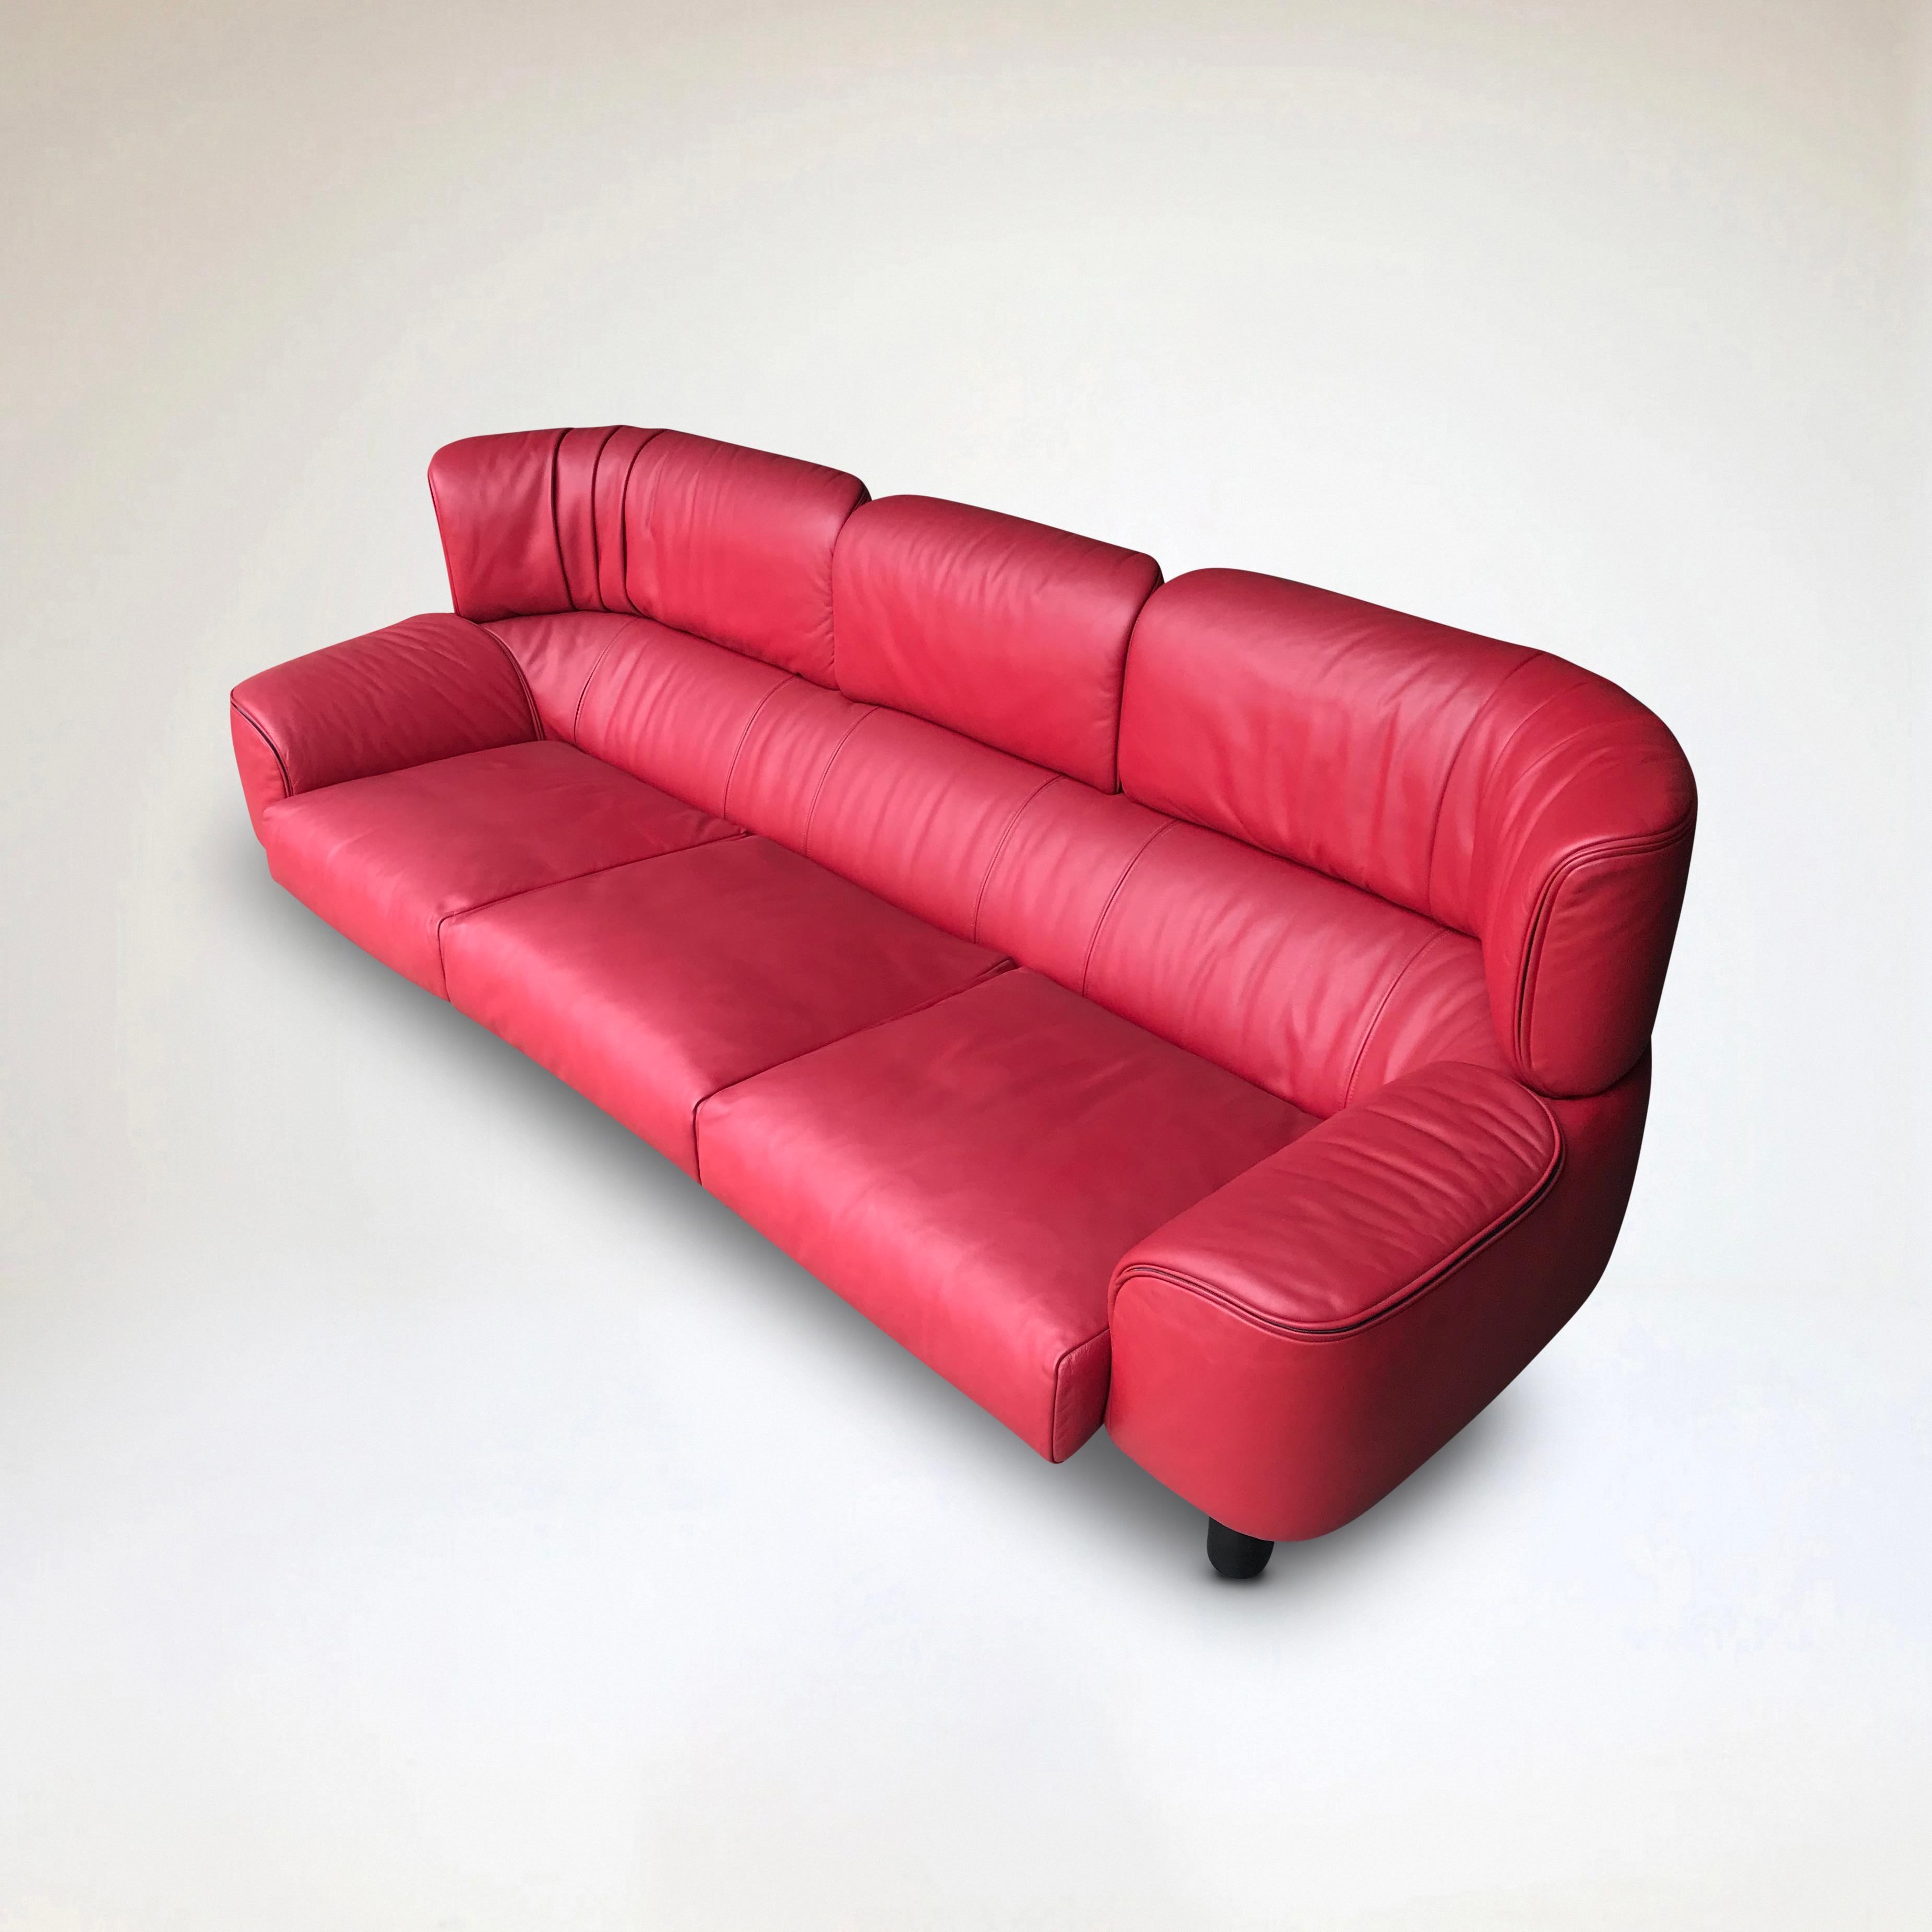 Bull 3-seater red leather sofa by Gianfranco Frattini for Cassina 1987 For Sale 4